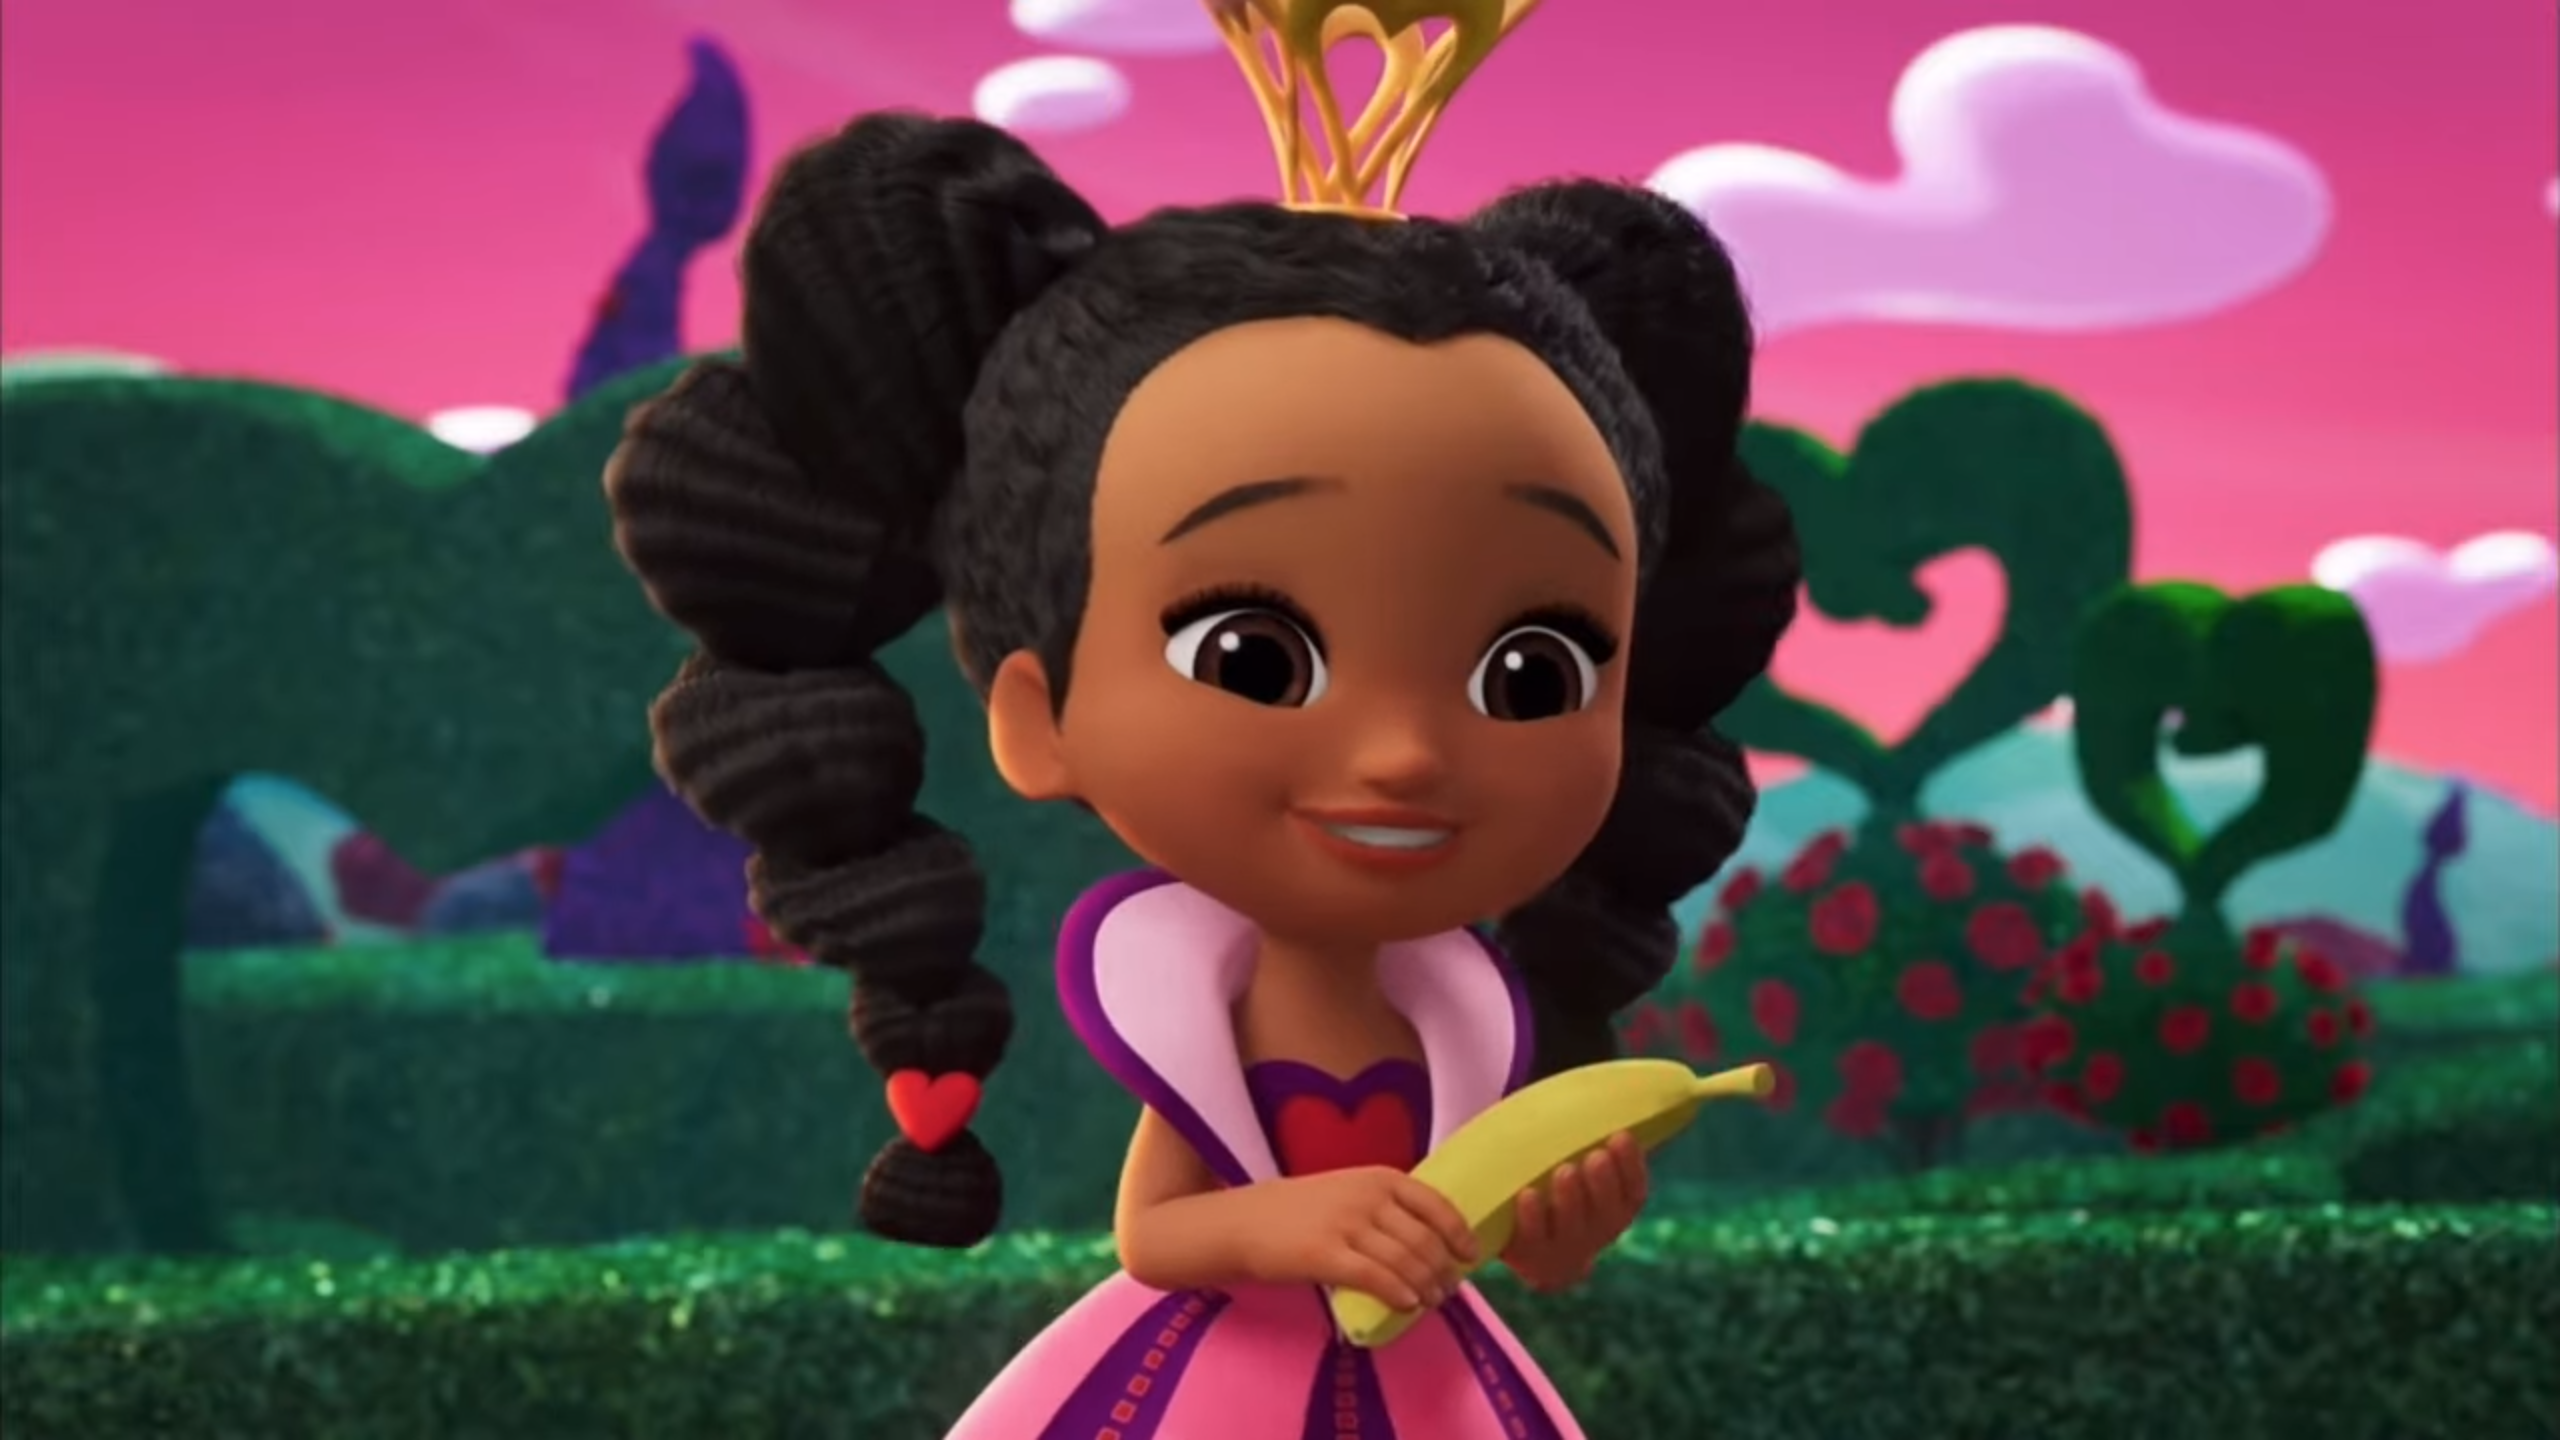 https://static.wikia.nocookie.net/disney/images/8/86/Rosa.png/revision/latest?cb=20220613131937